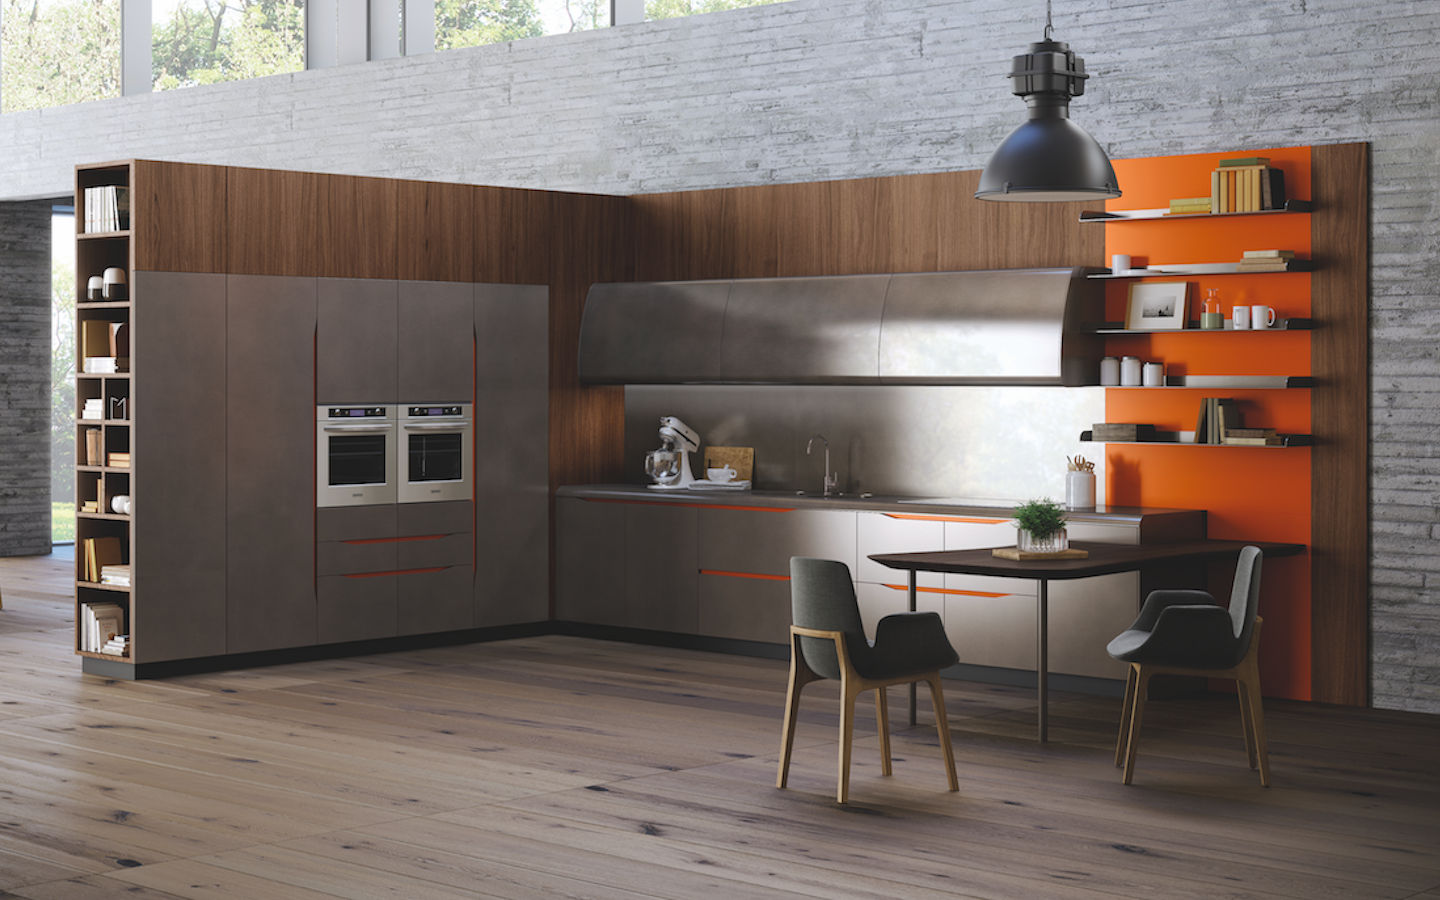 Here’s a kitchen available in Malaysia that’s inspired by the Lamborghini Miura